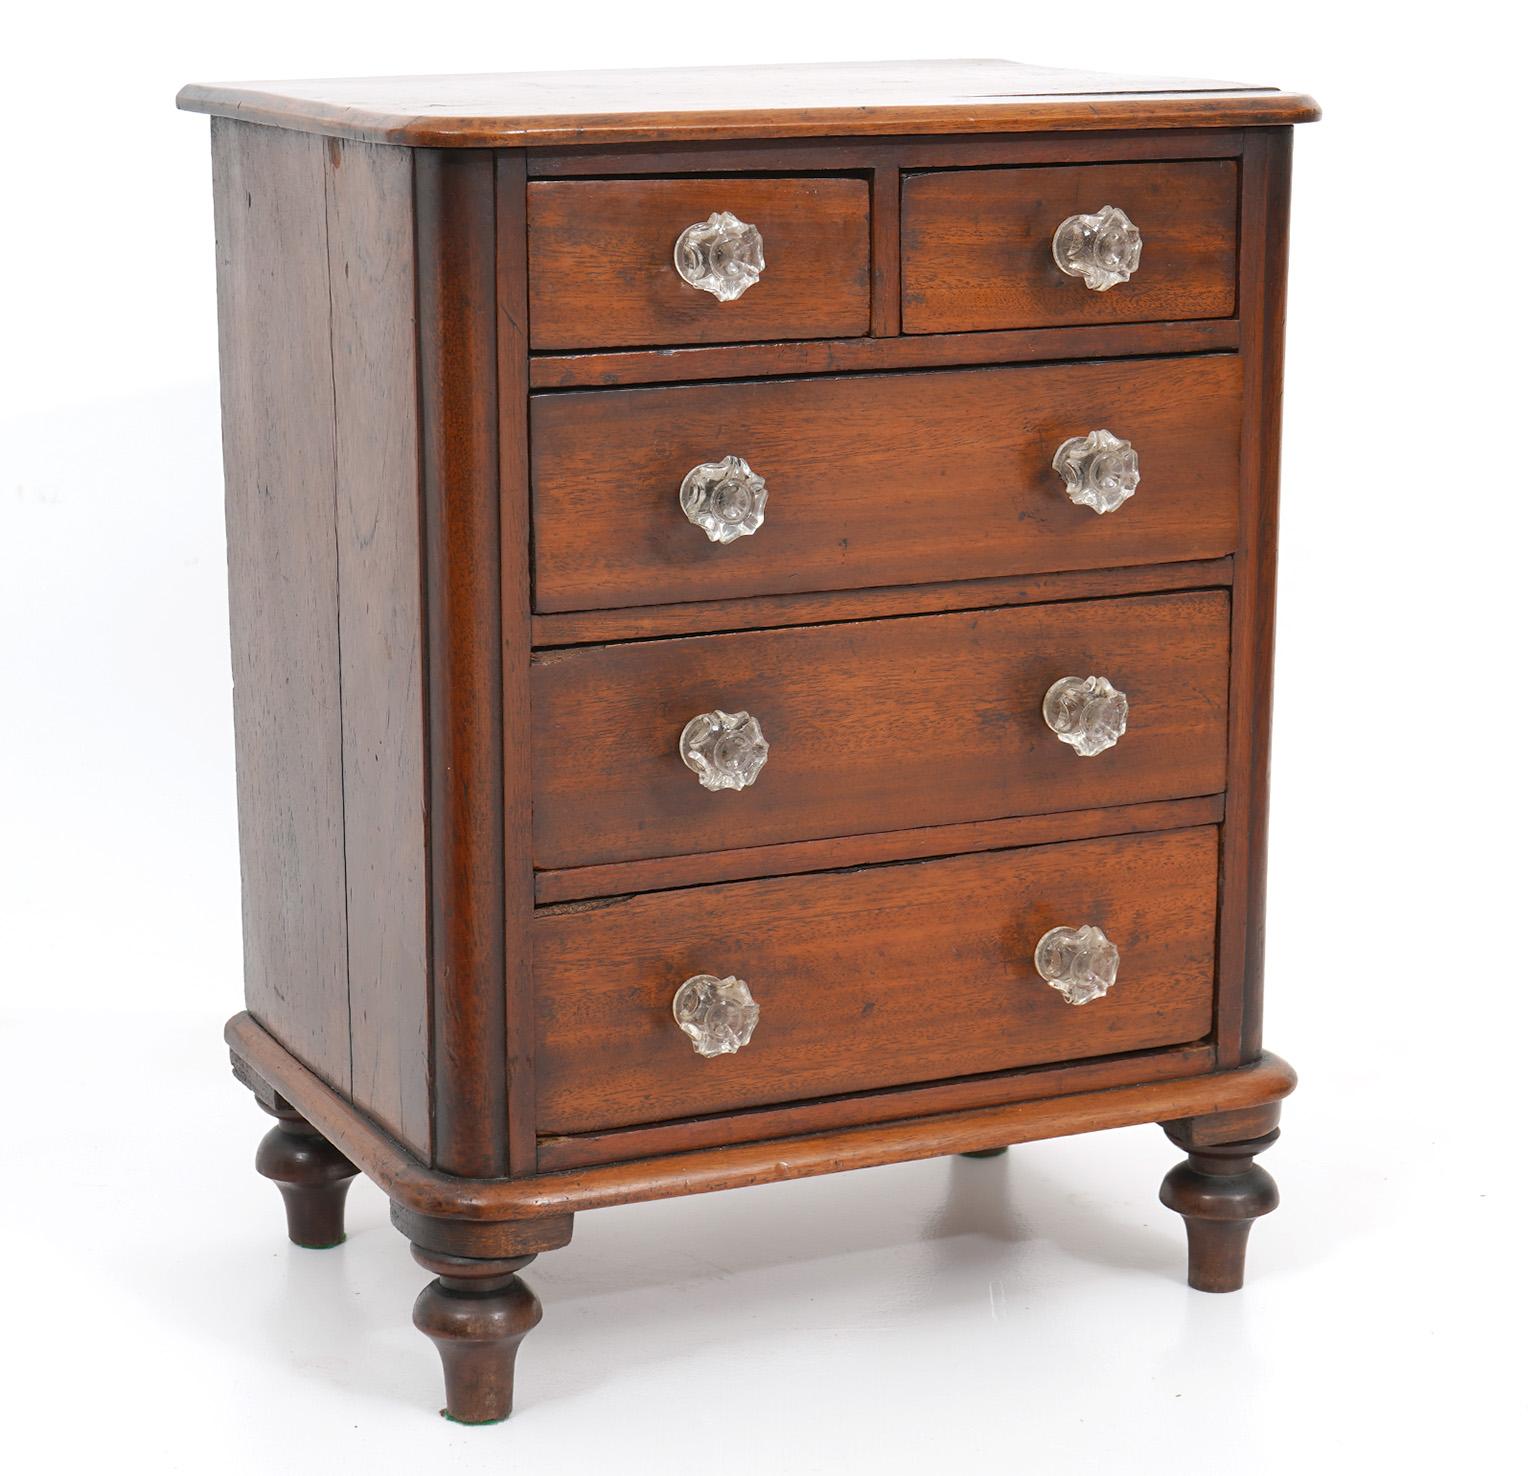 Antique Miniature Commode. English, Mahogany, circa 1850's in a Sheraton Style with glass knobs. 12